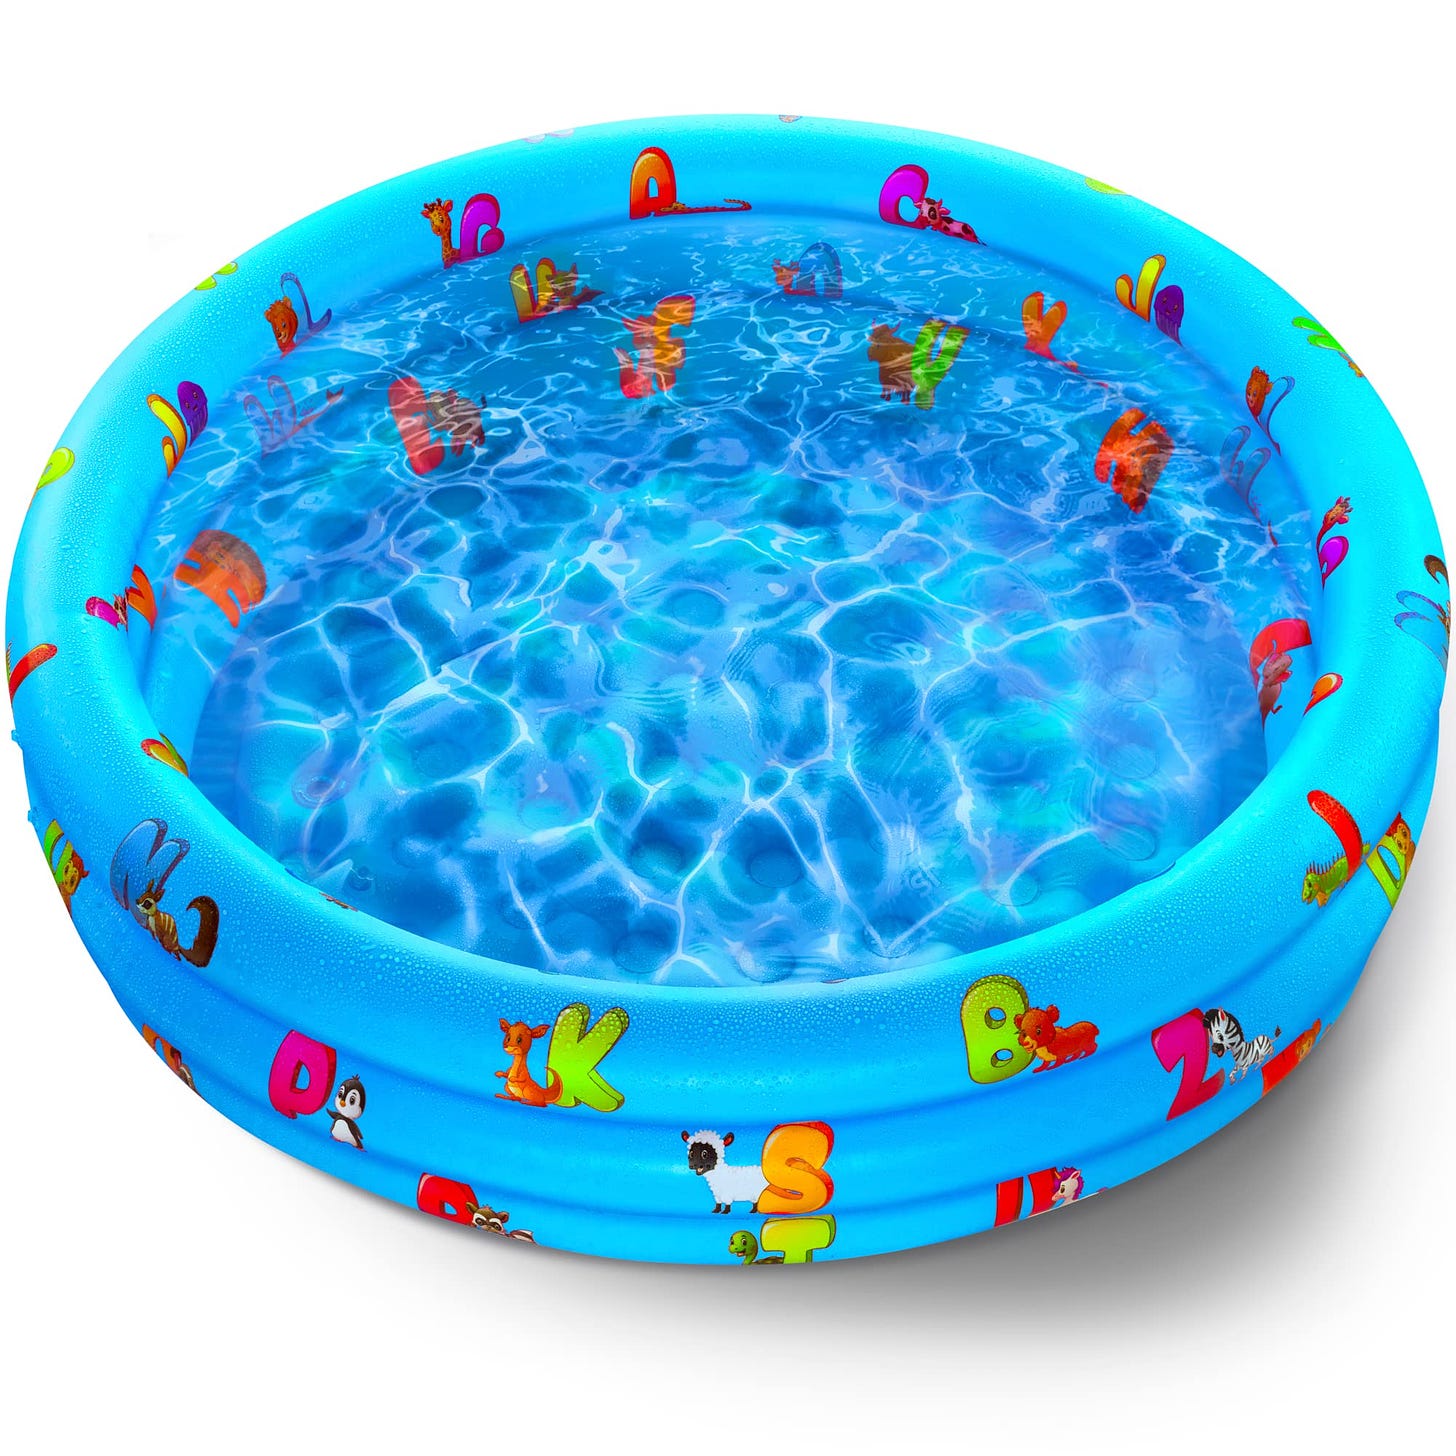 Inflatable Kiddie Pool for Kids - Kids Pools for Backyard - Swimming Pool  for Kids, Toddlers, Baby - 3 Ring Pools for Inside and Outside - Durable  Material with Soft Blow Up Bubble Botton, Blue